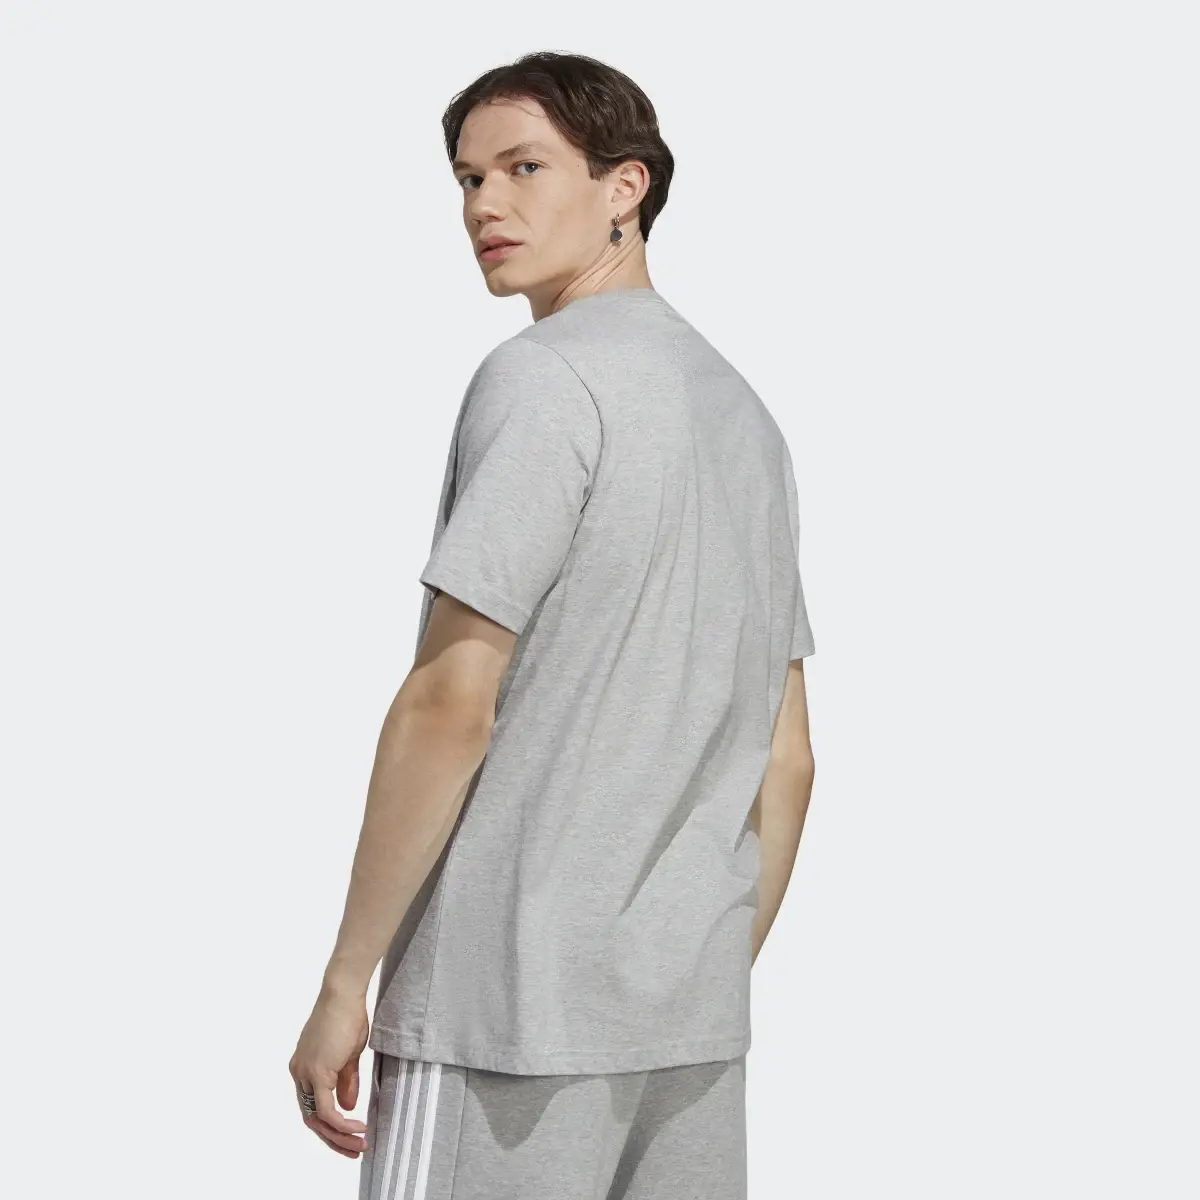 Adidas Essentials Single Jersey Embroidered Small Logo Tee. 3